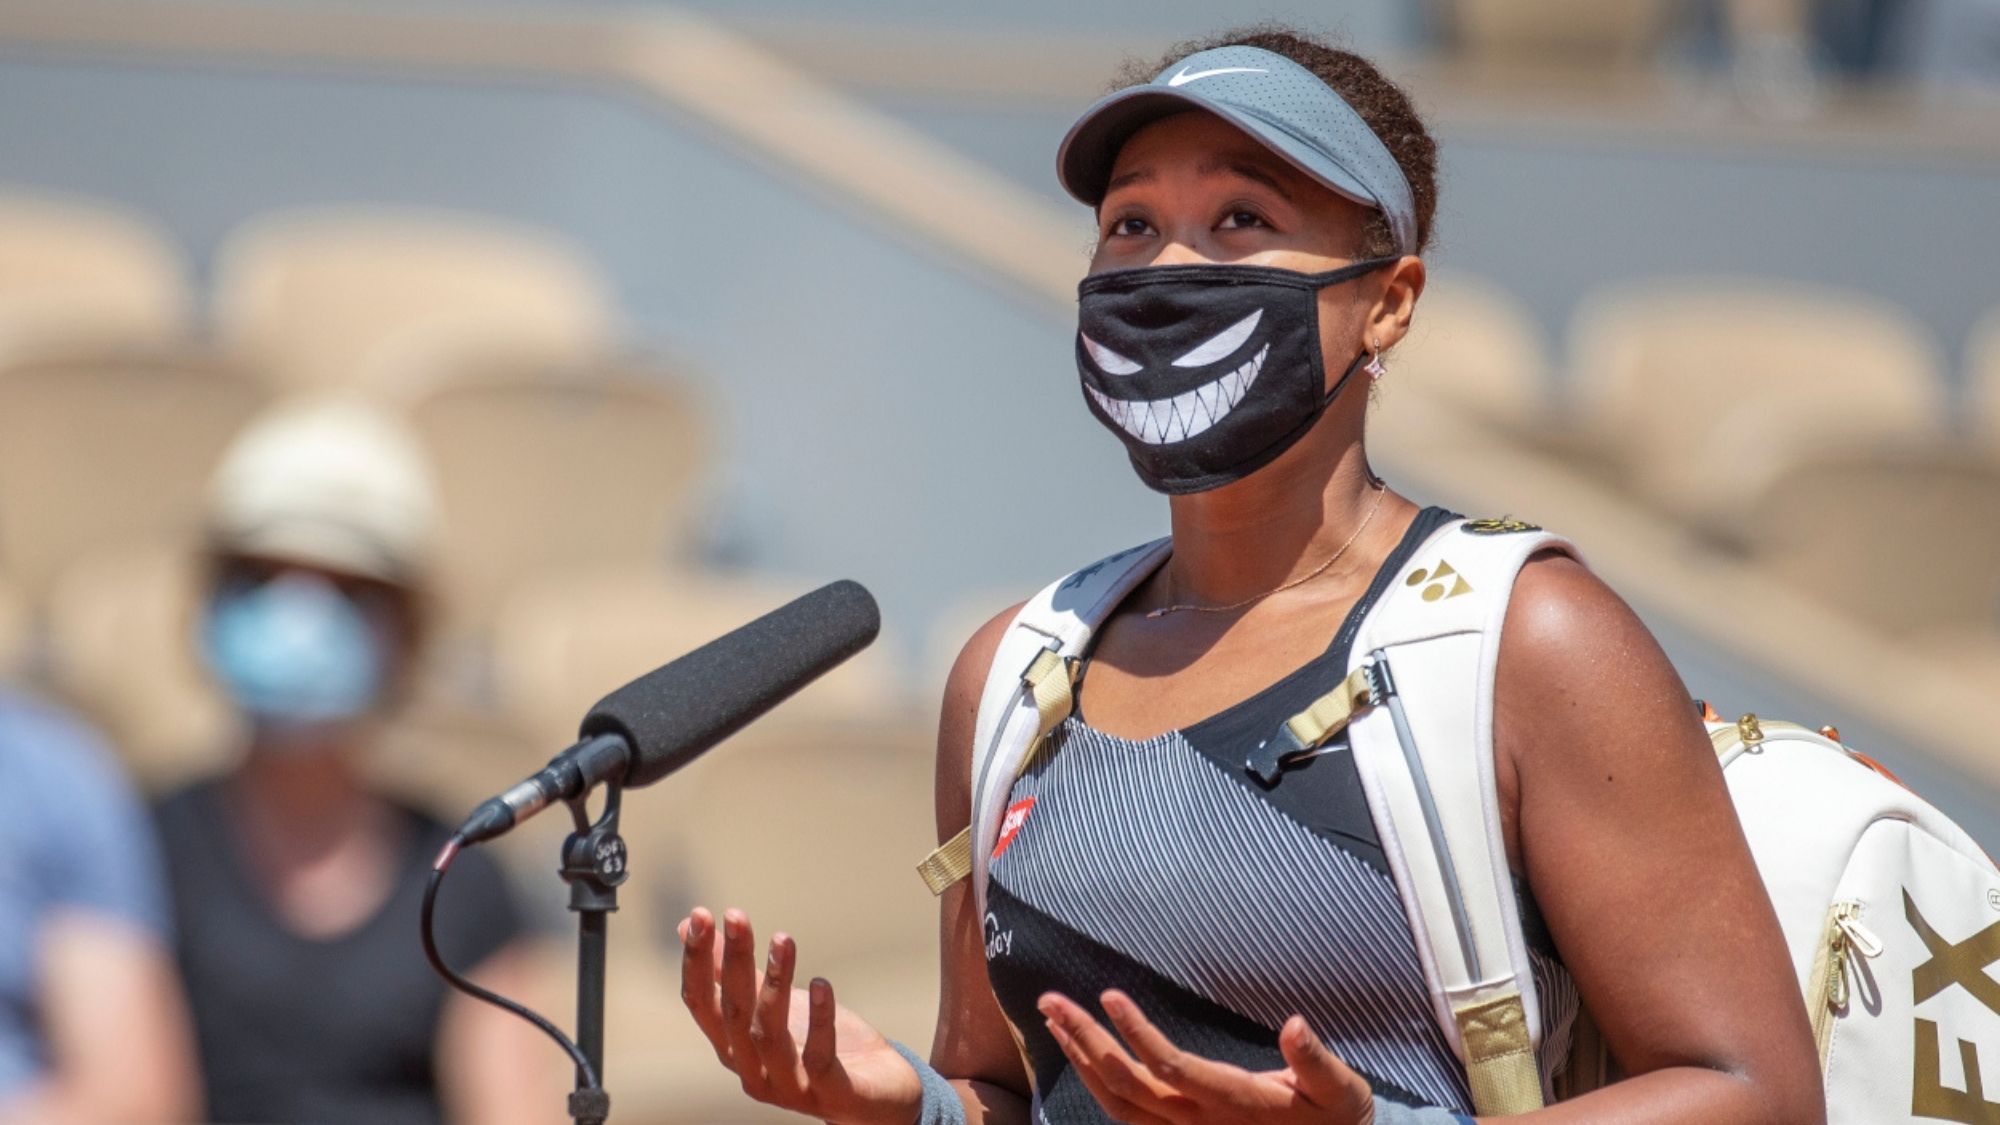 Naomi Osaka’s withdrawal from French Open turns spotlight on athletes’ mental health